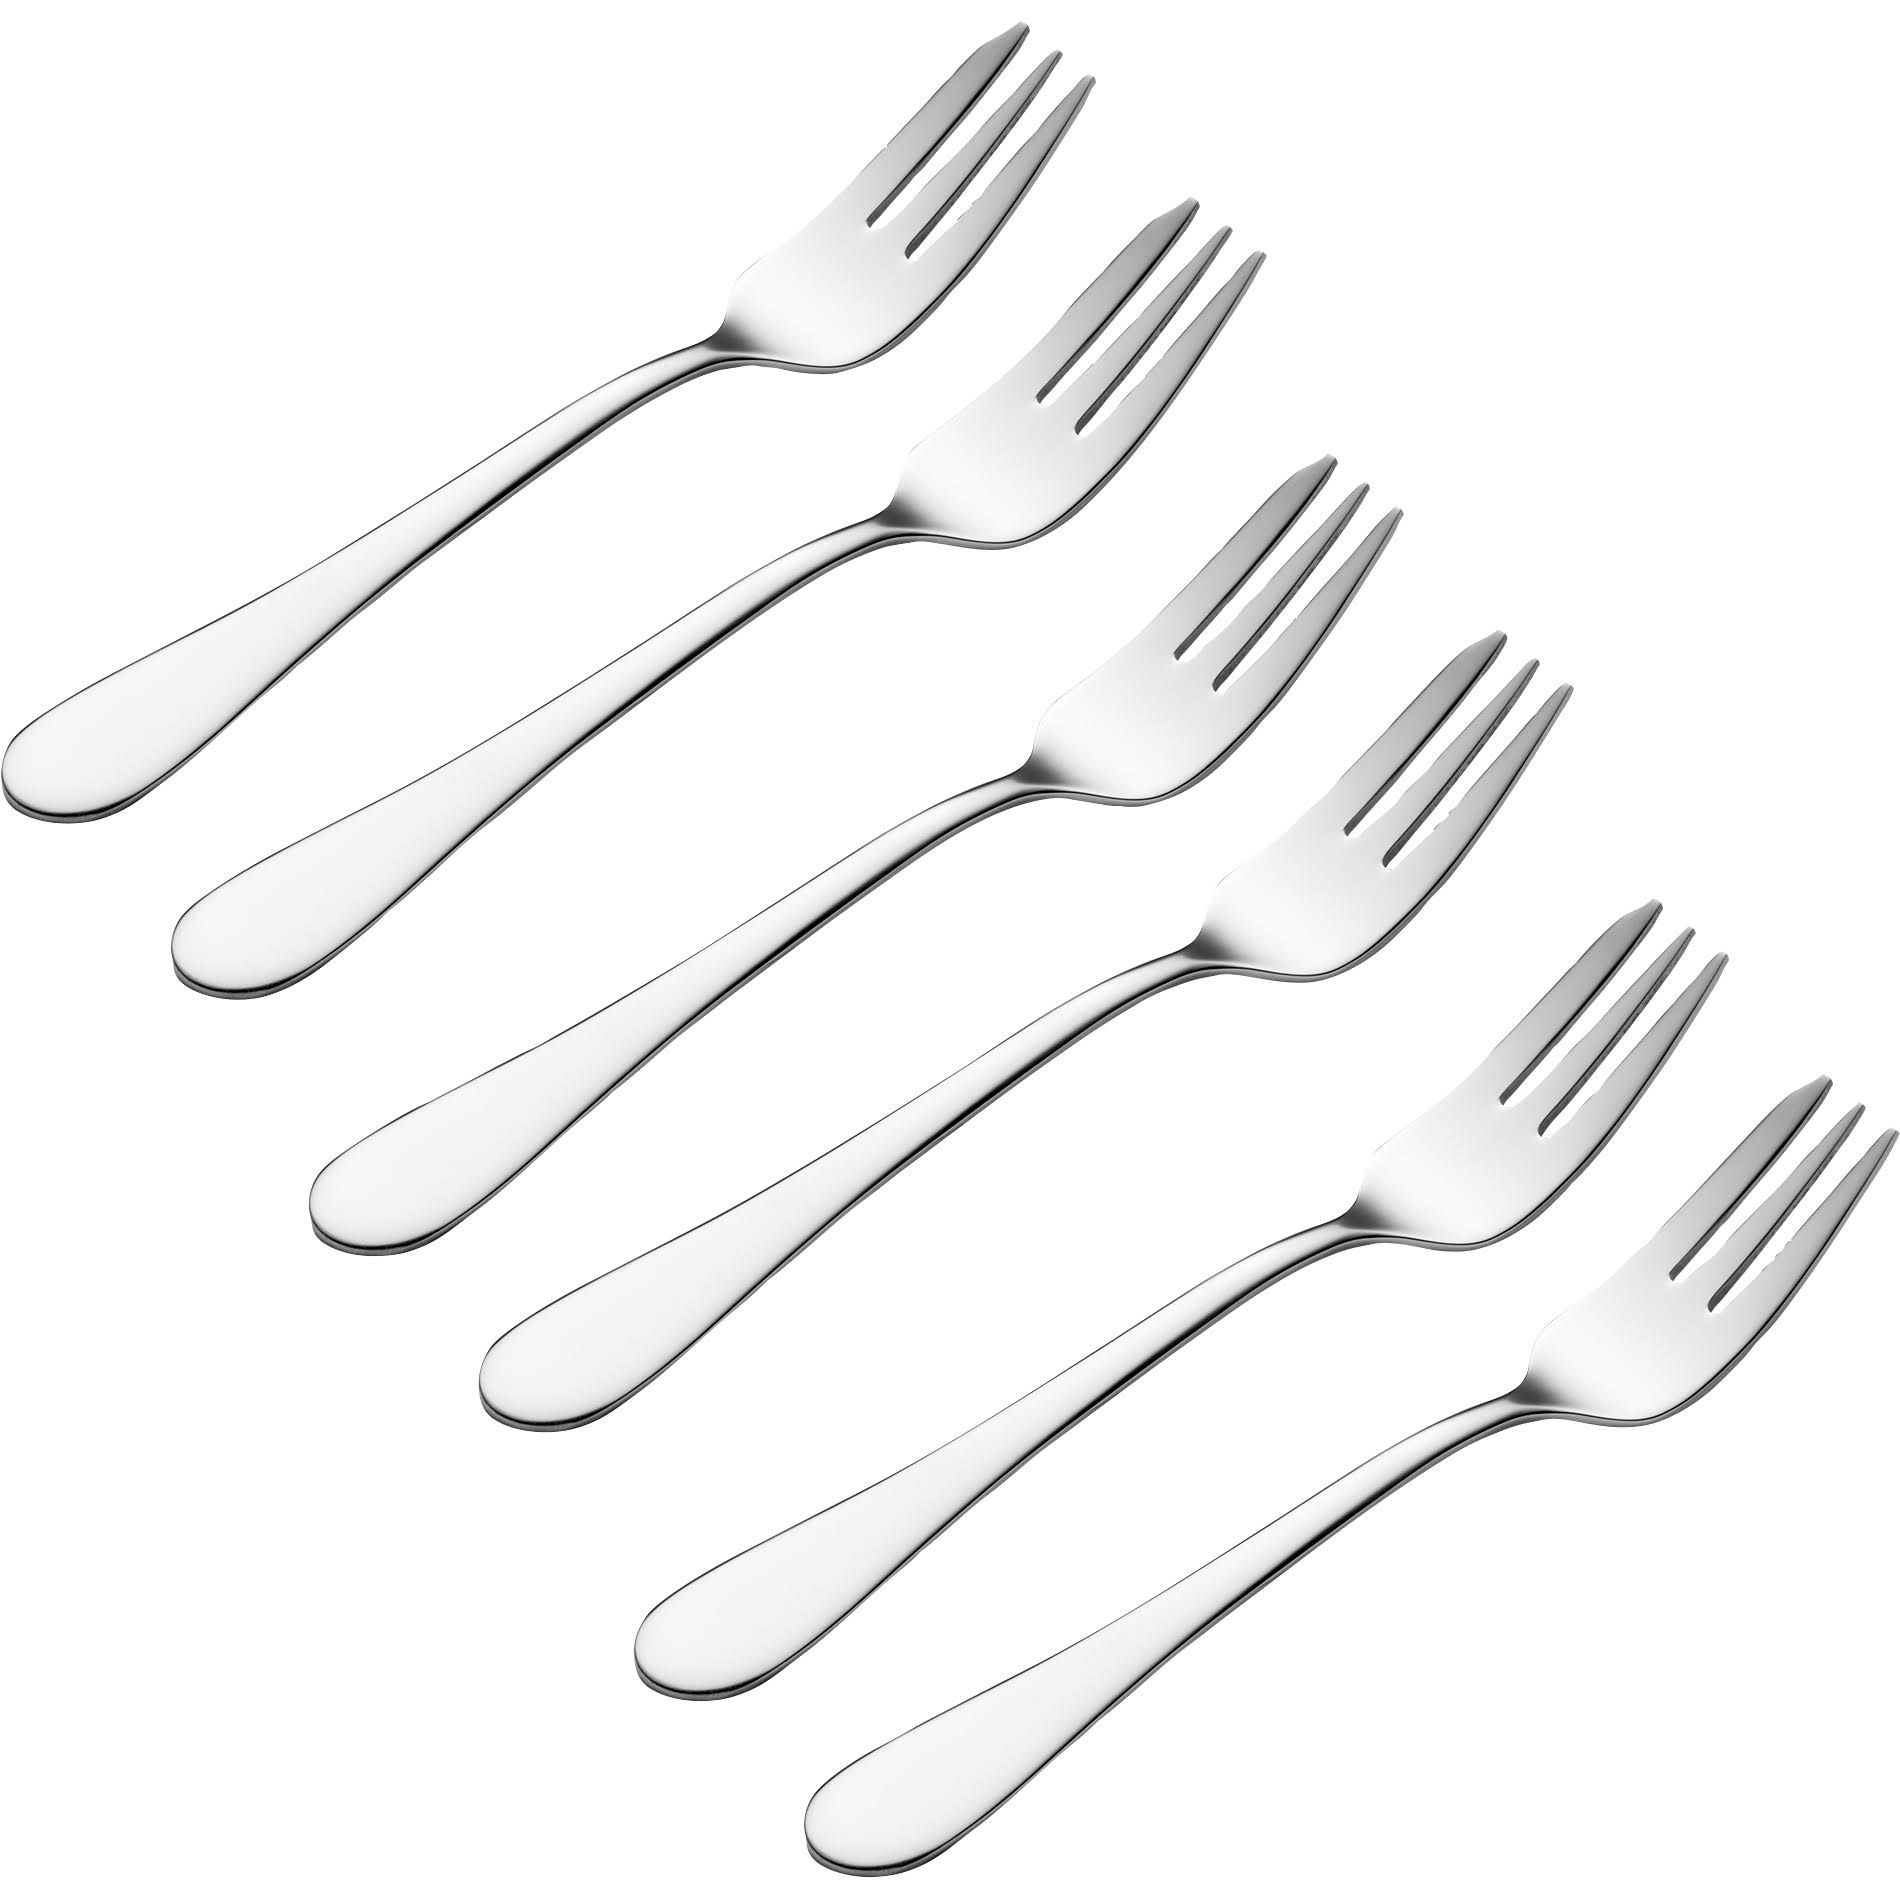 Viners Select Pastry Forks (Set of 6)